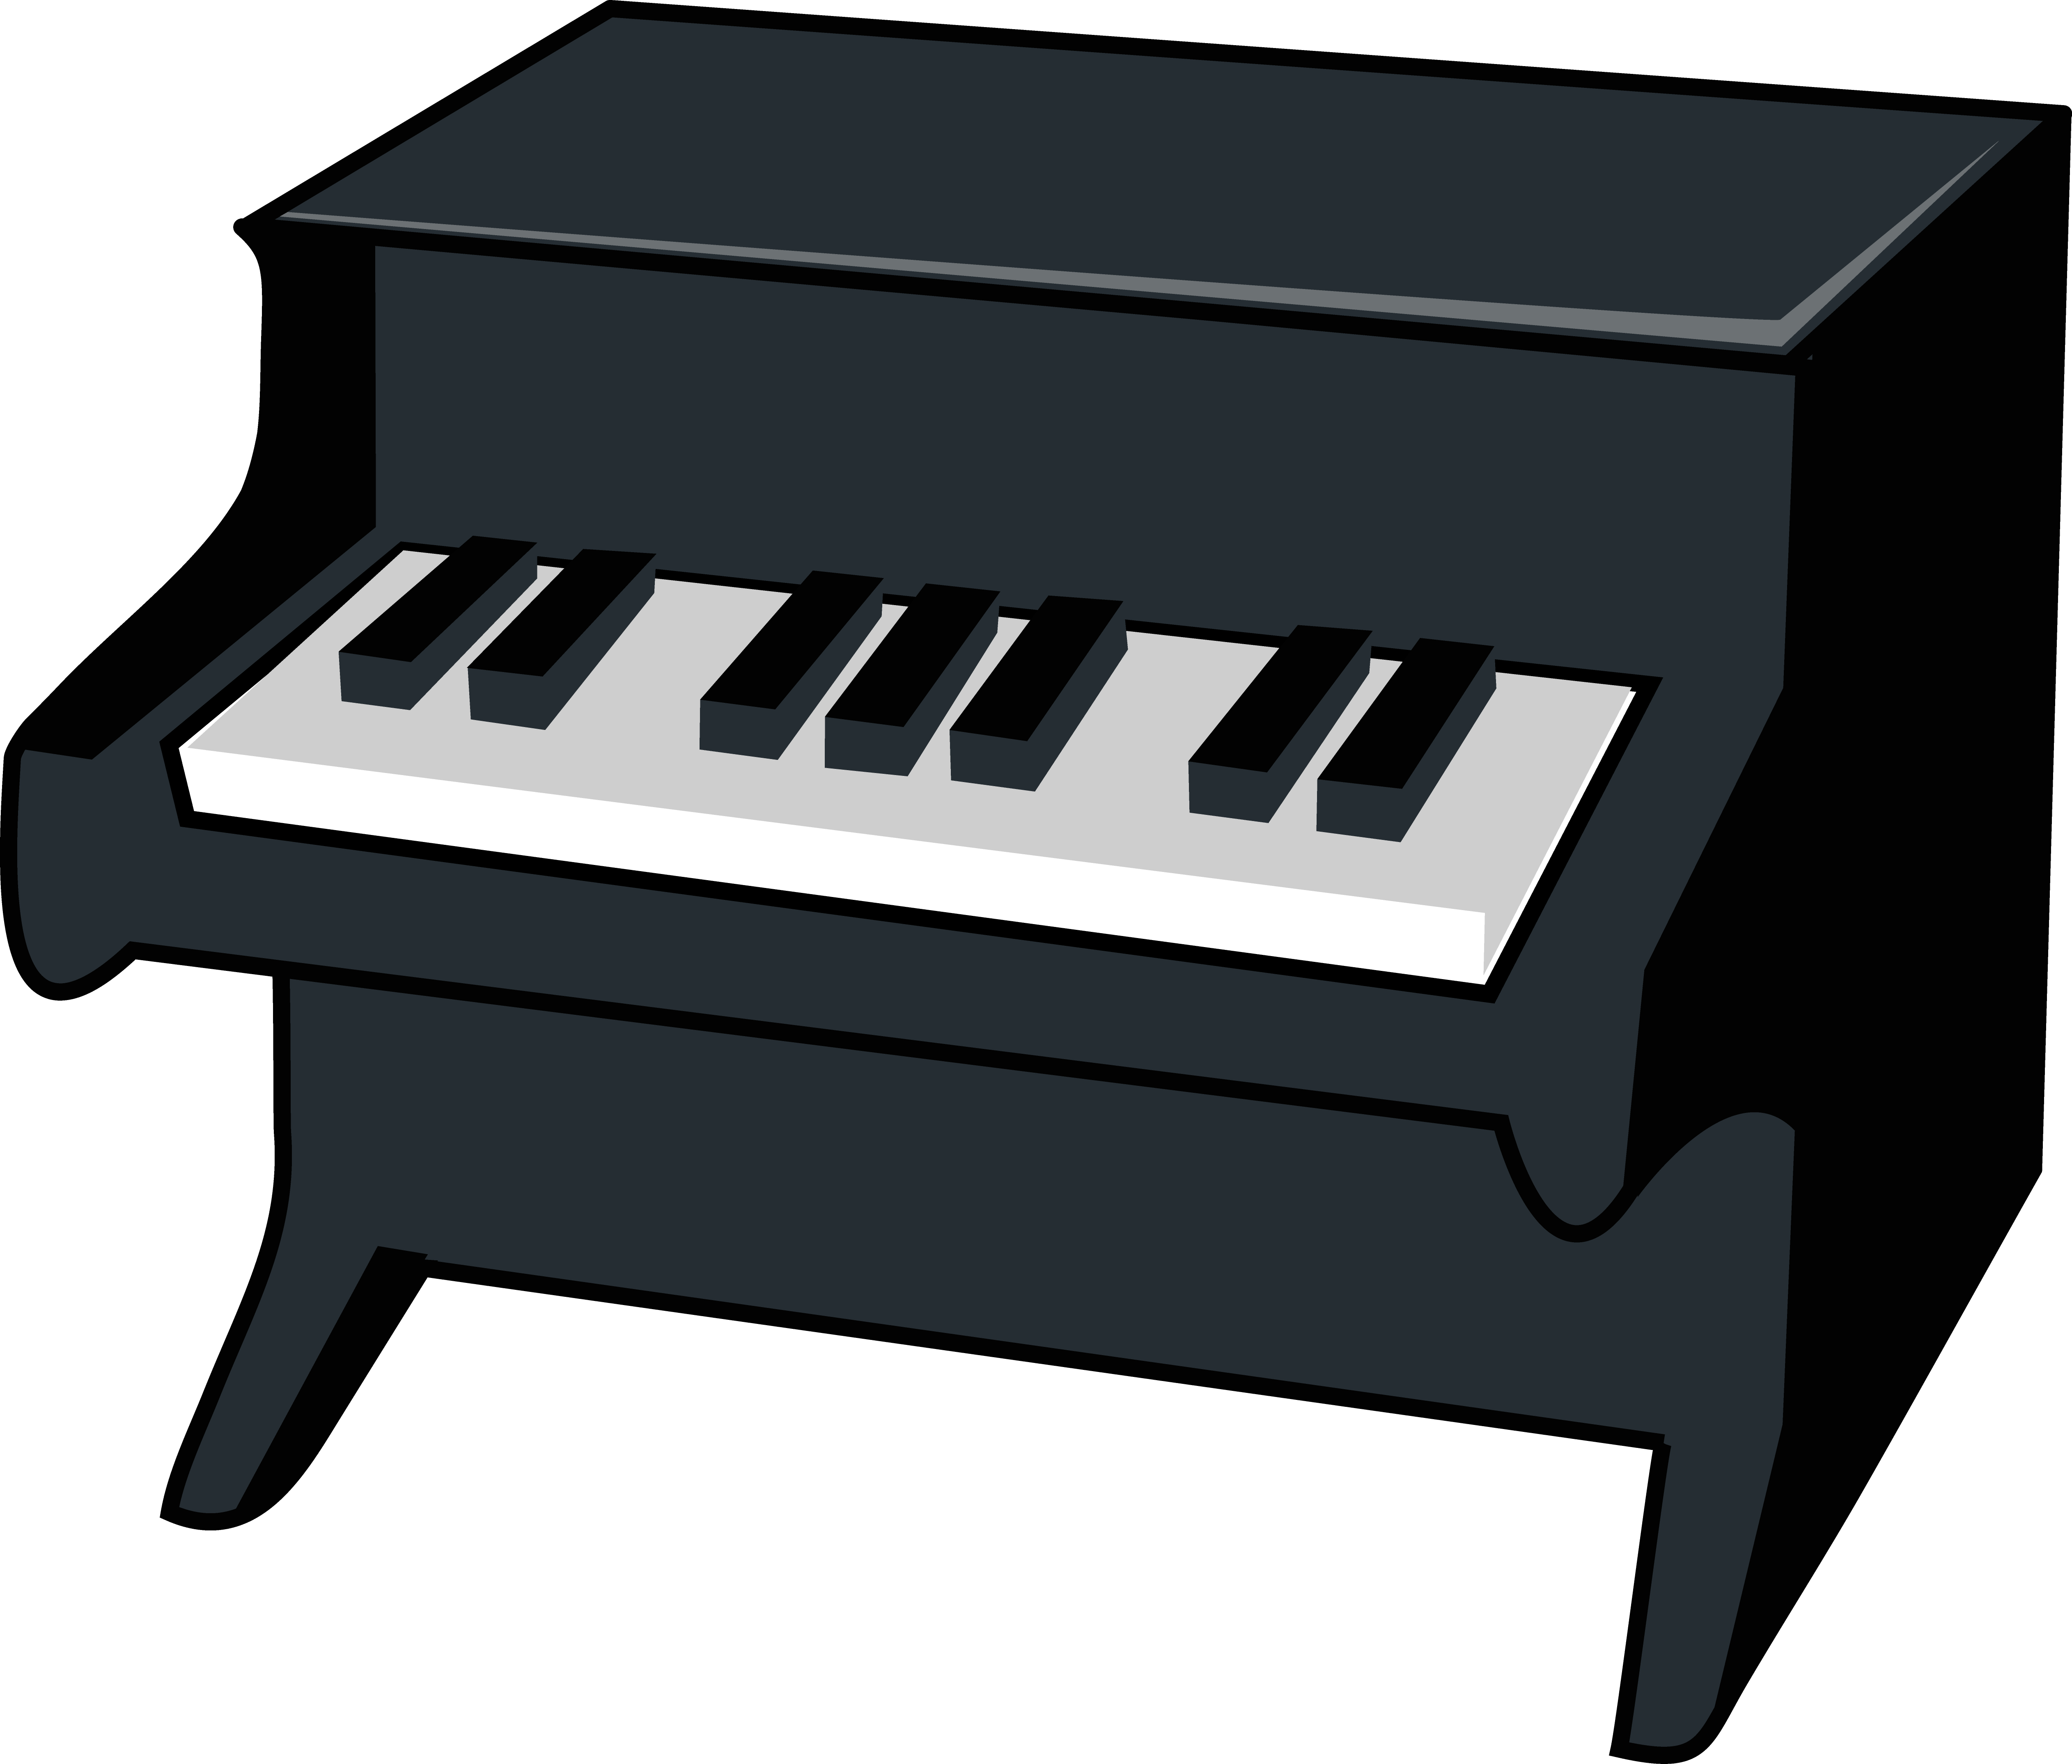 Keyboard and piano clipart image 7 - Clipartix